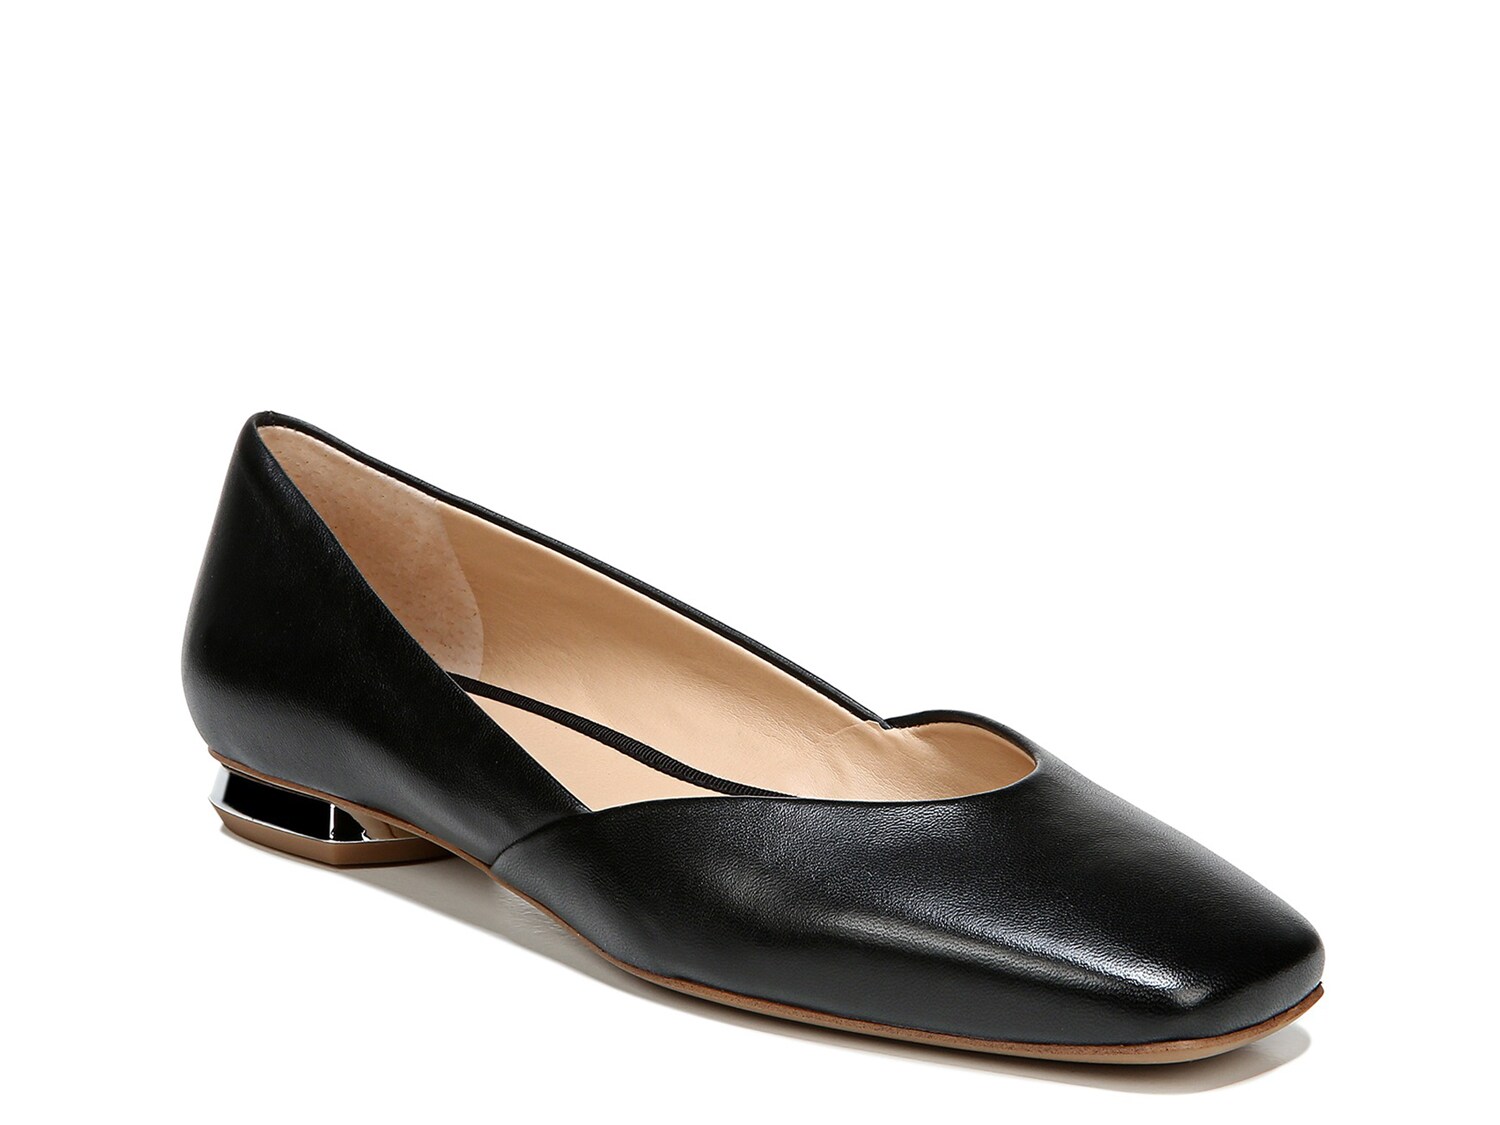 Details about   Franco Sarto Women's Anders Flats Pump 